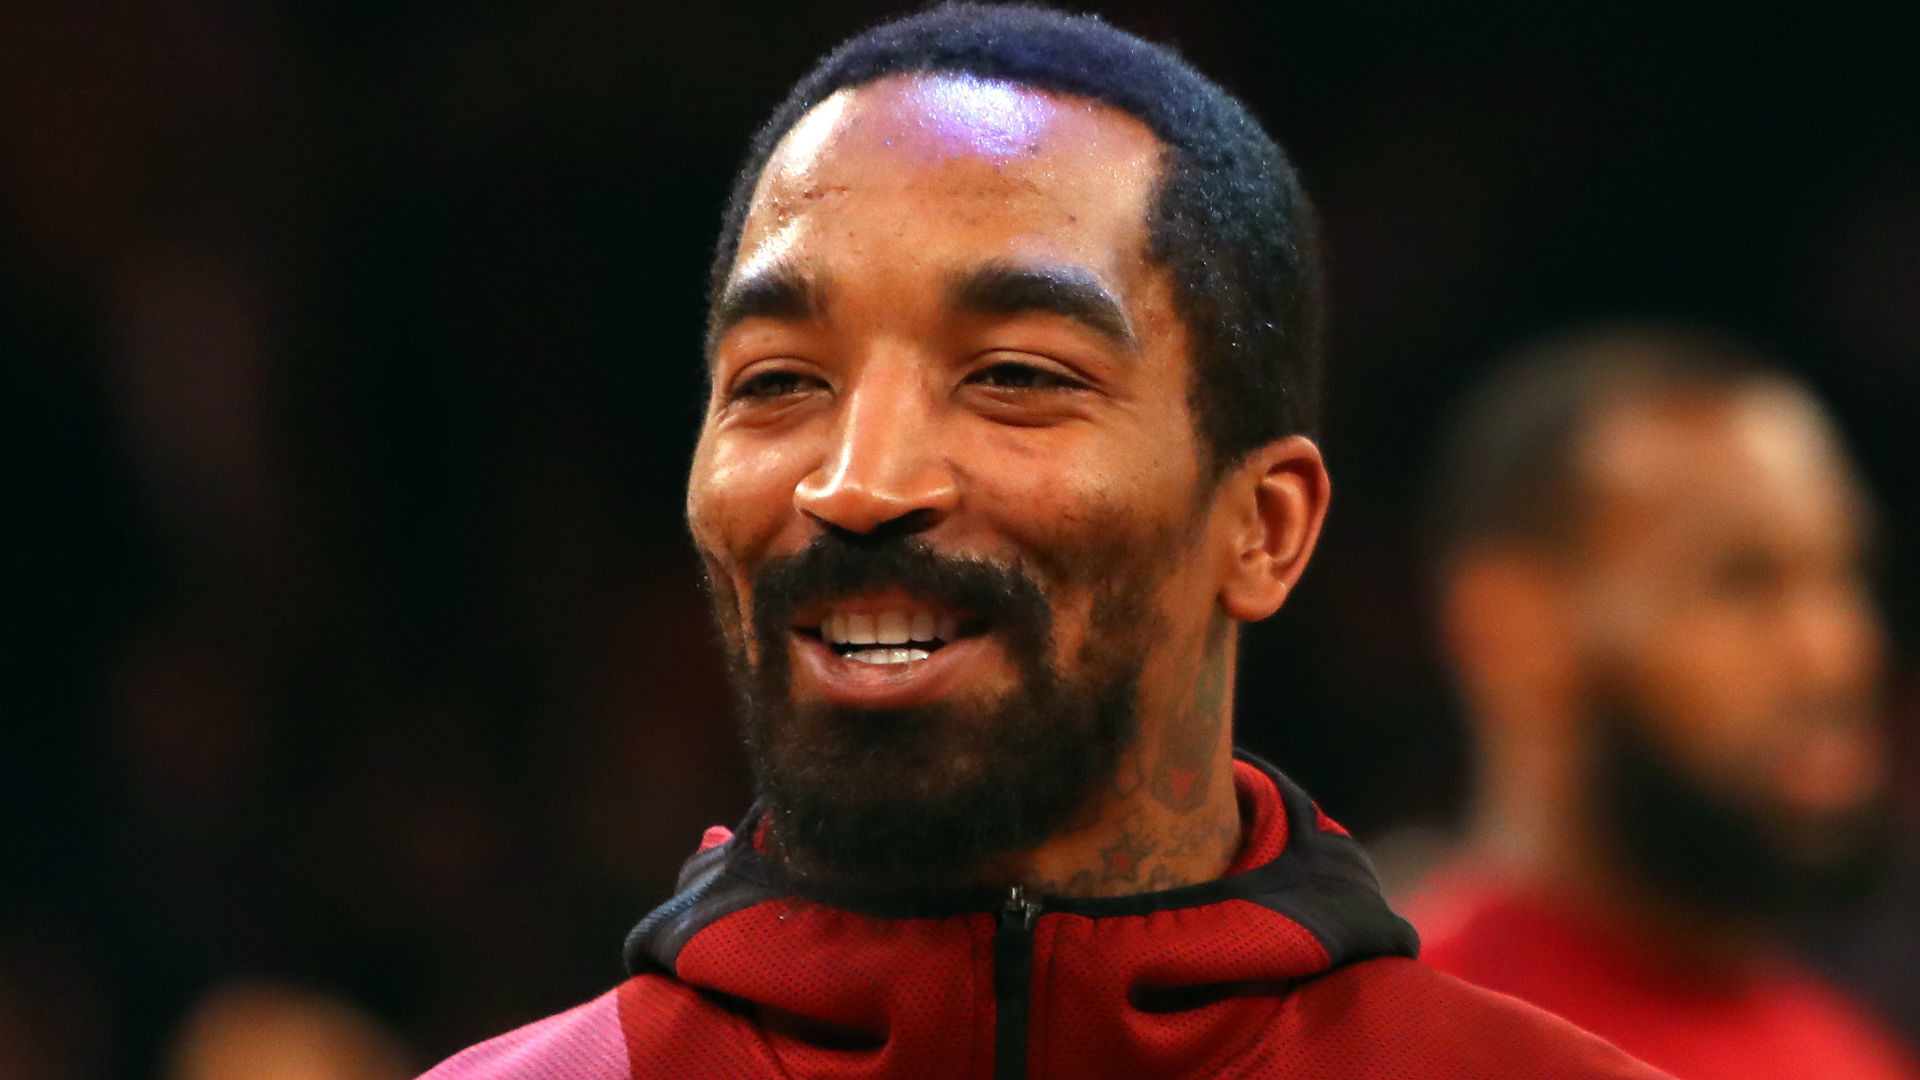 1920x1080 NBA Finals 2018: Watch JR Smith get standing ovation at Oracle Arena | NBA